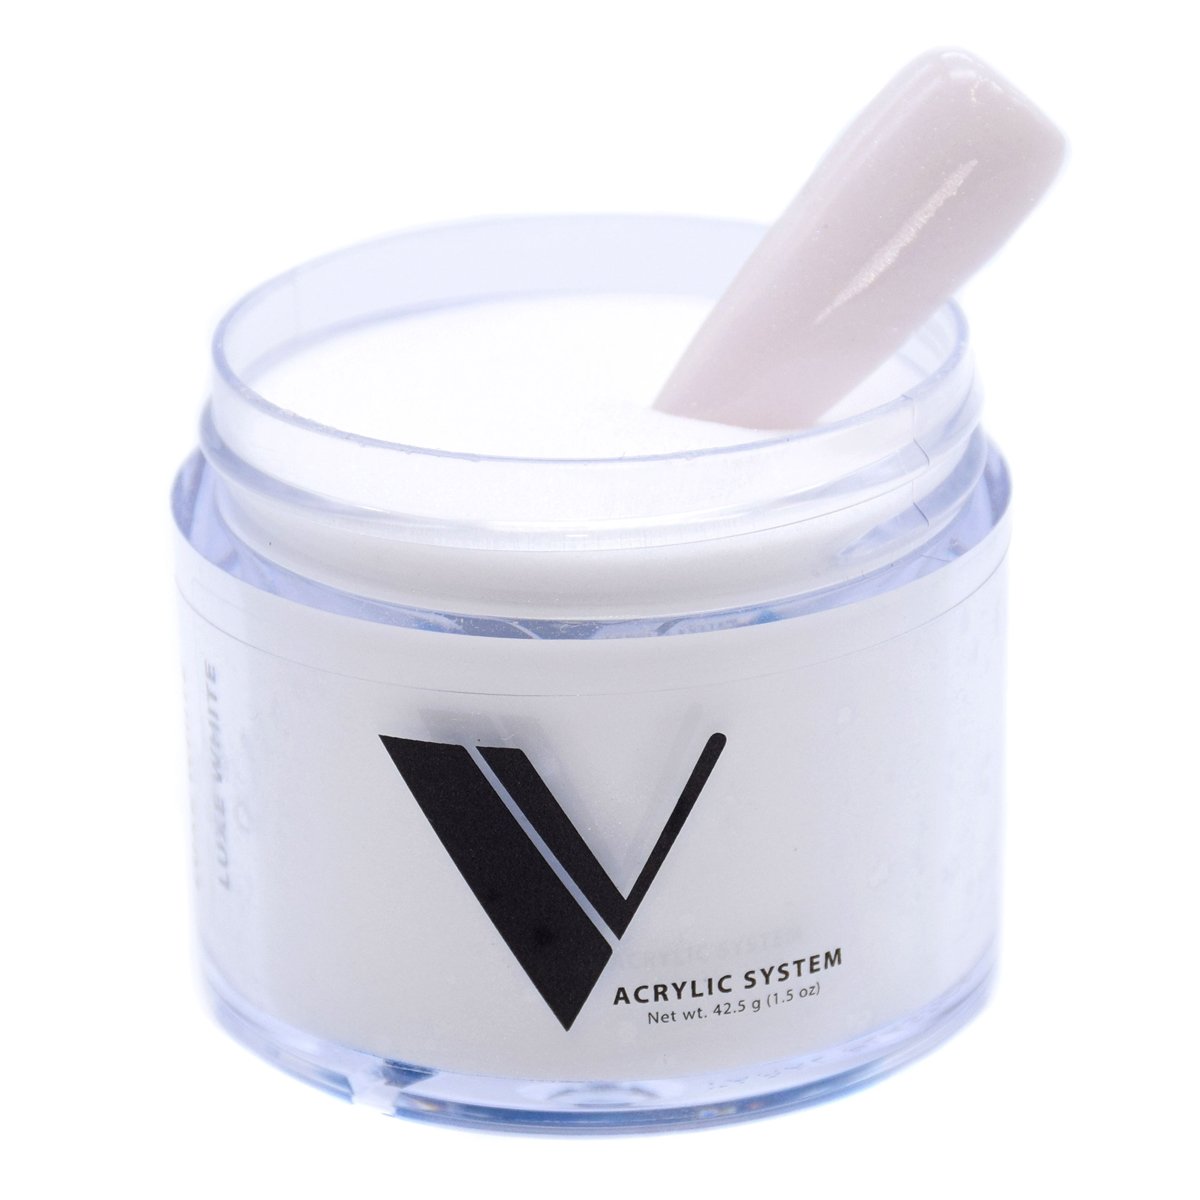 Acrylic Powder - Acrylic System by Valentino Beauty Pure - Luxe White